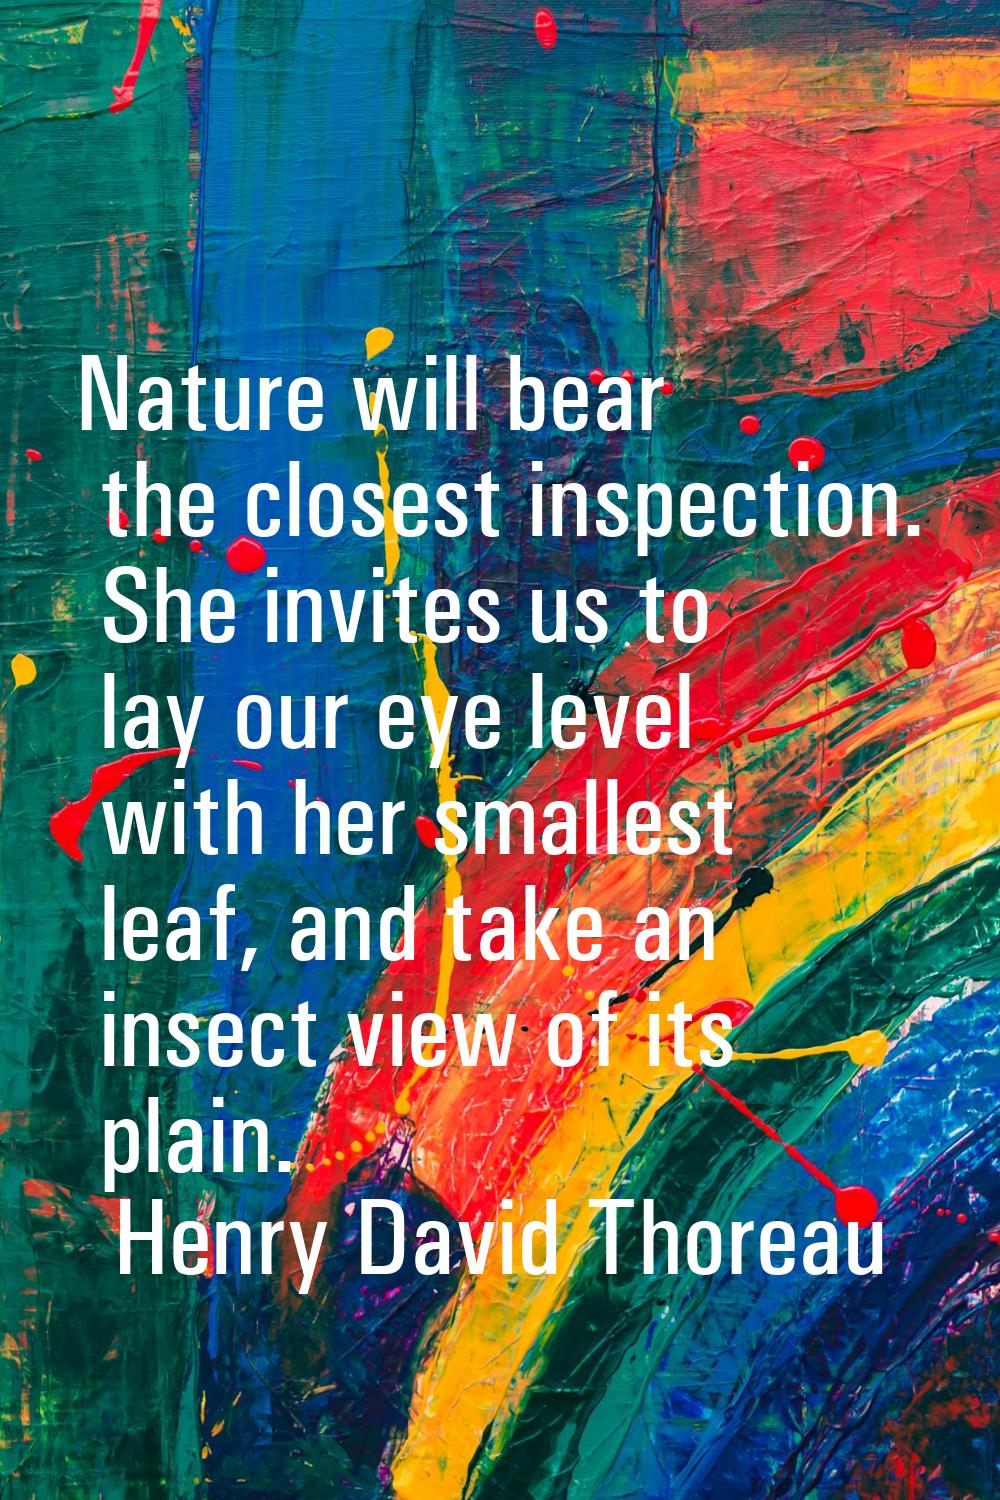 Nature will bear the closest inspection. She invites us to lay our eye level with her smallest leaf